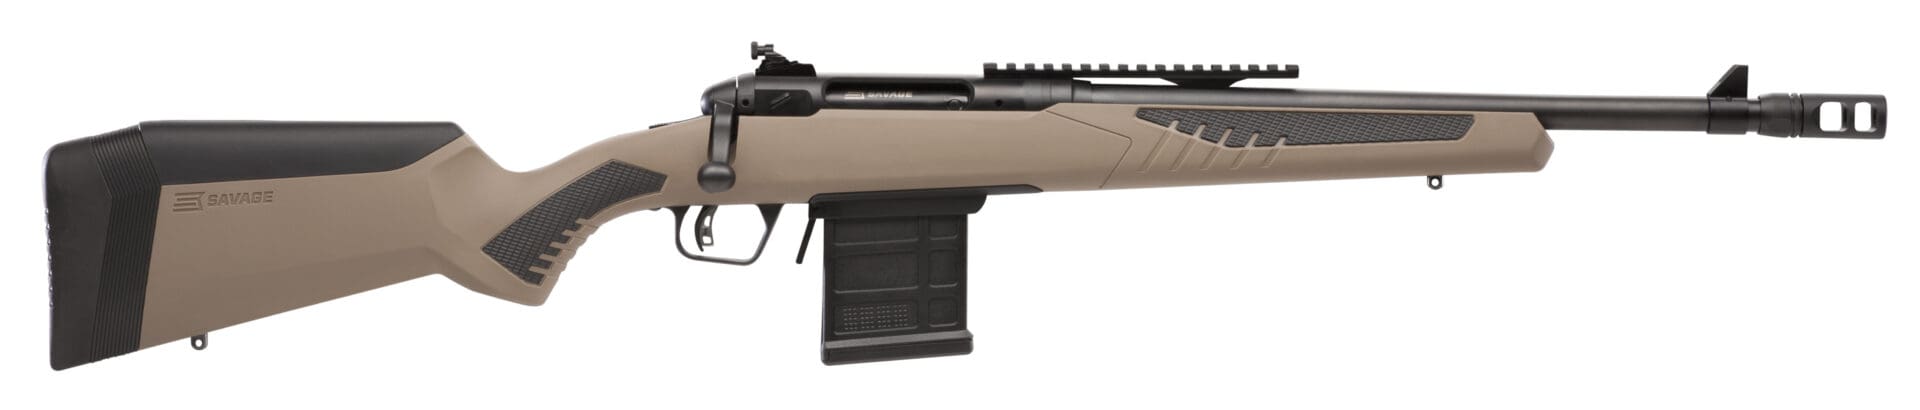 New From Savage: Nine Rifles With AccuFit Stock System - The Truth